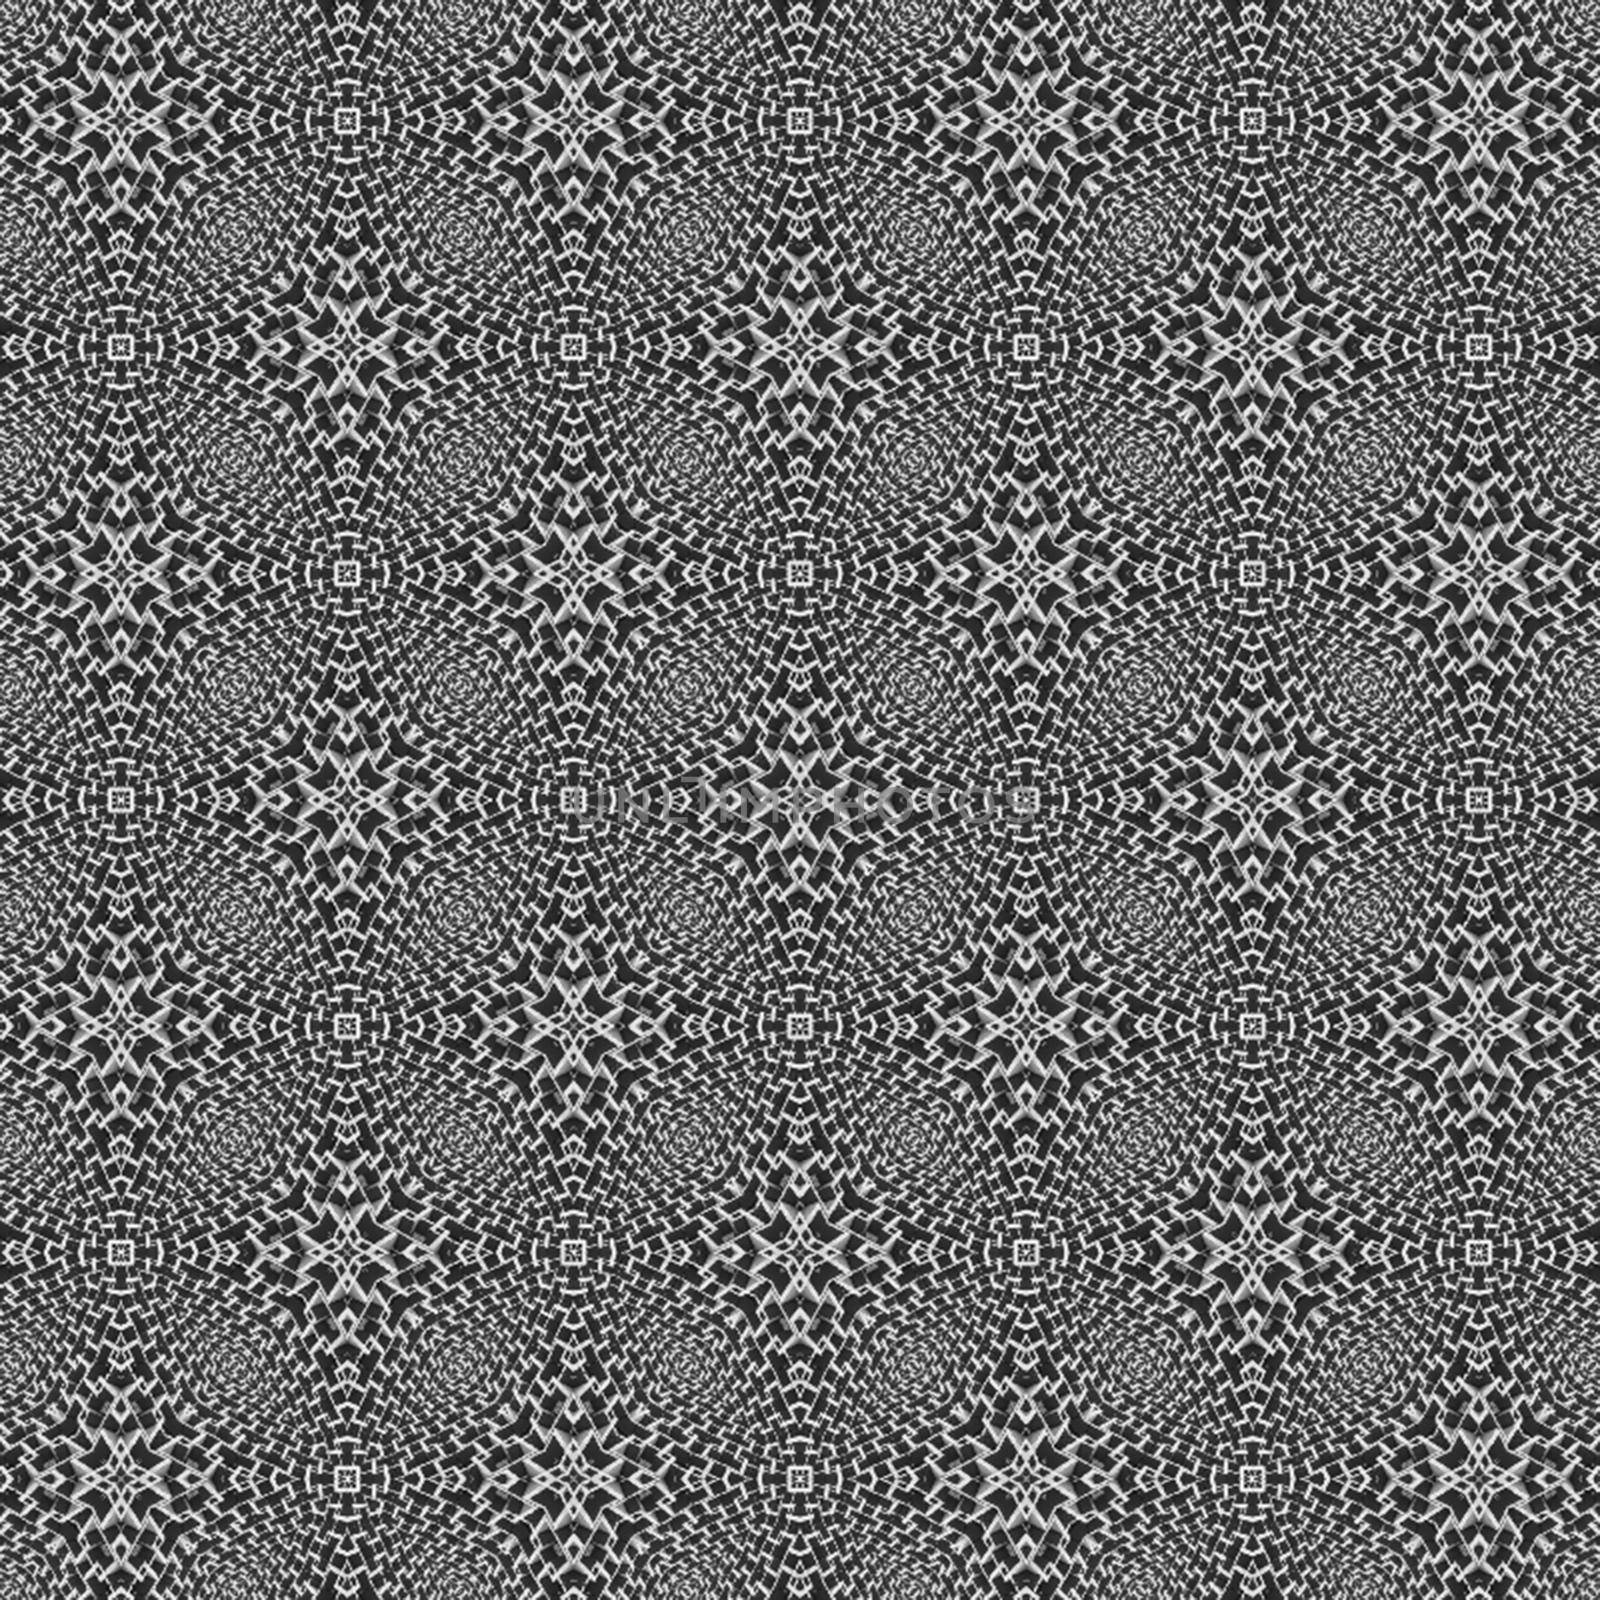 Pattern vector images by TravelSync27